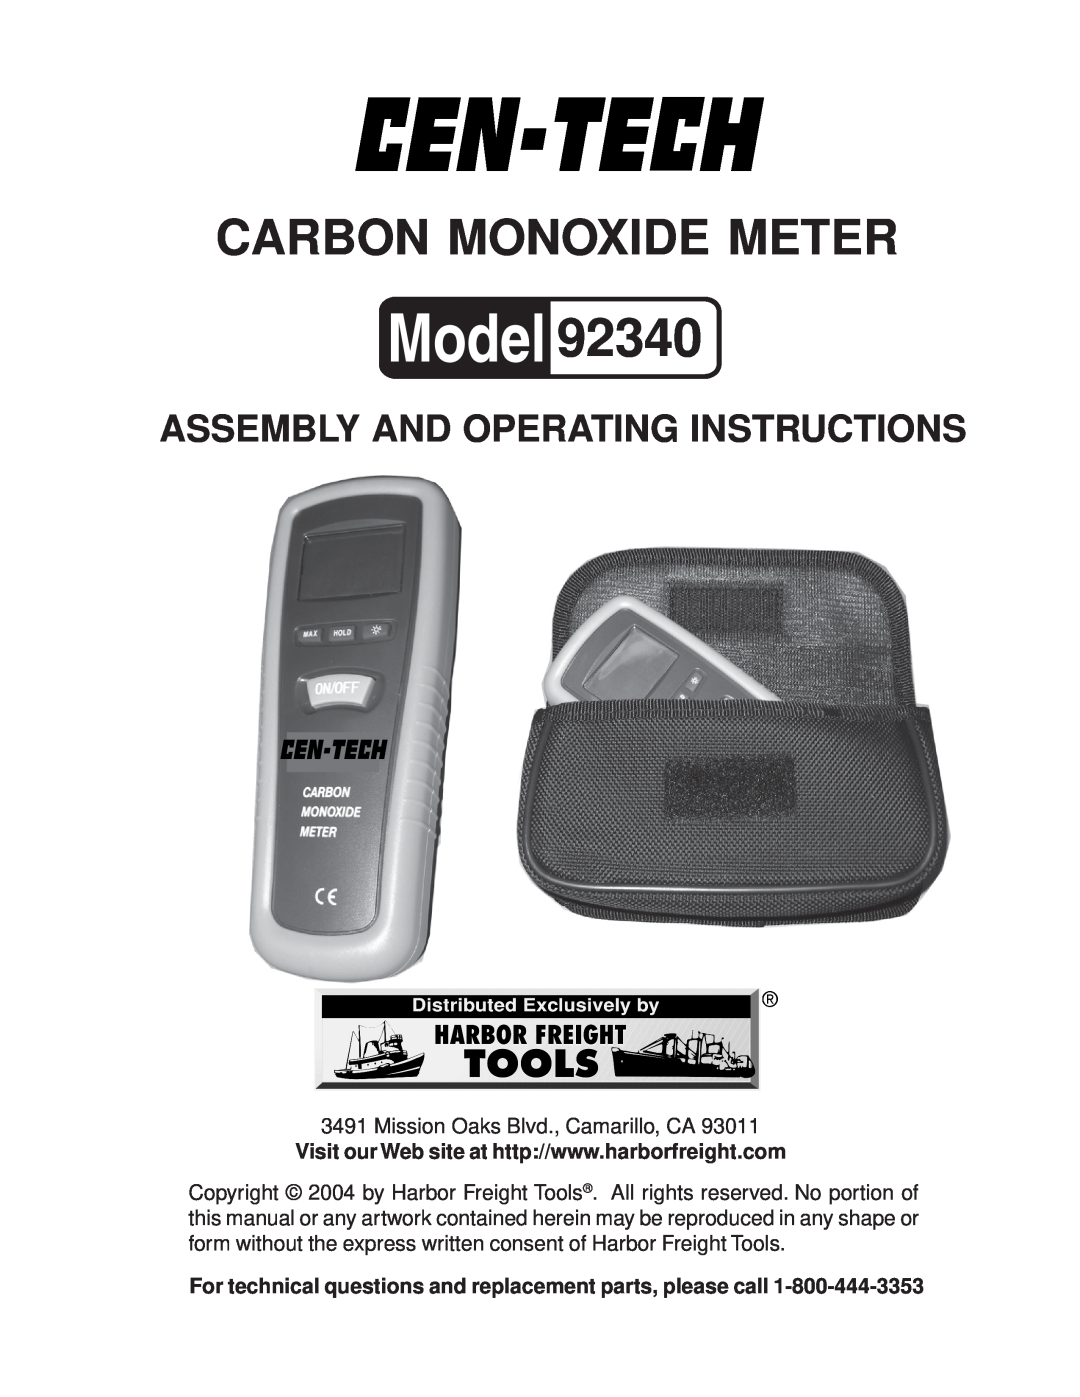 Harbor Freight Tools 92340 manual Carbon Monoxide Meter, Assembly And Operating Instructions 